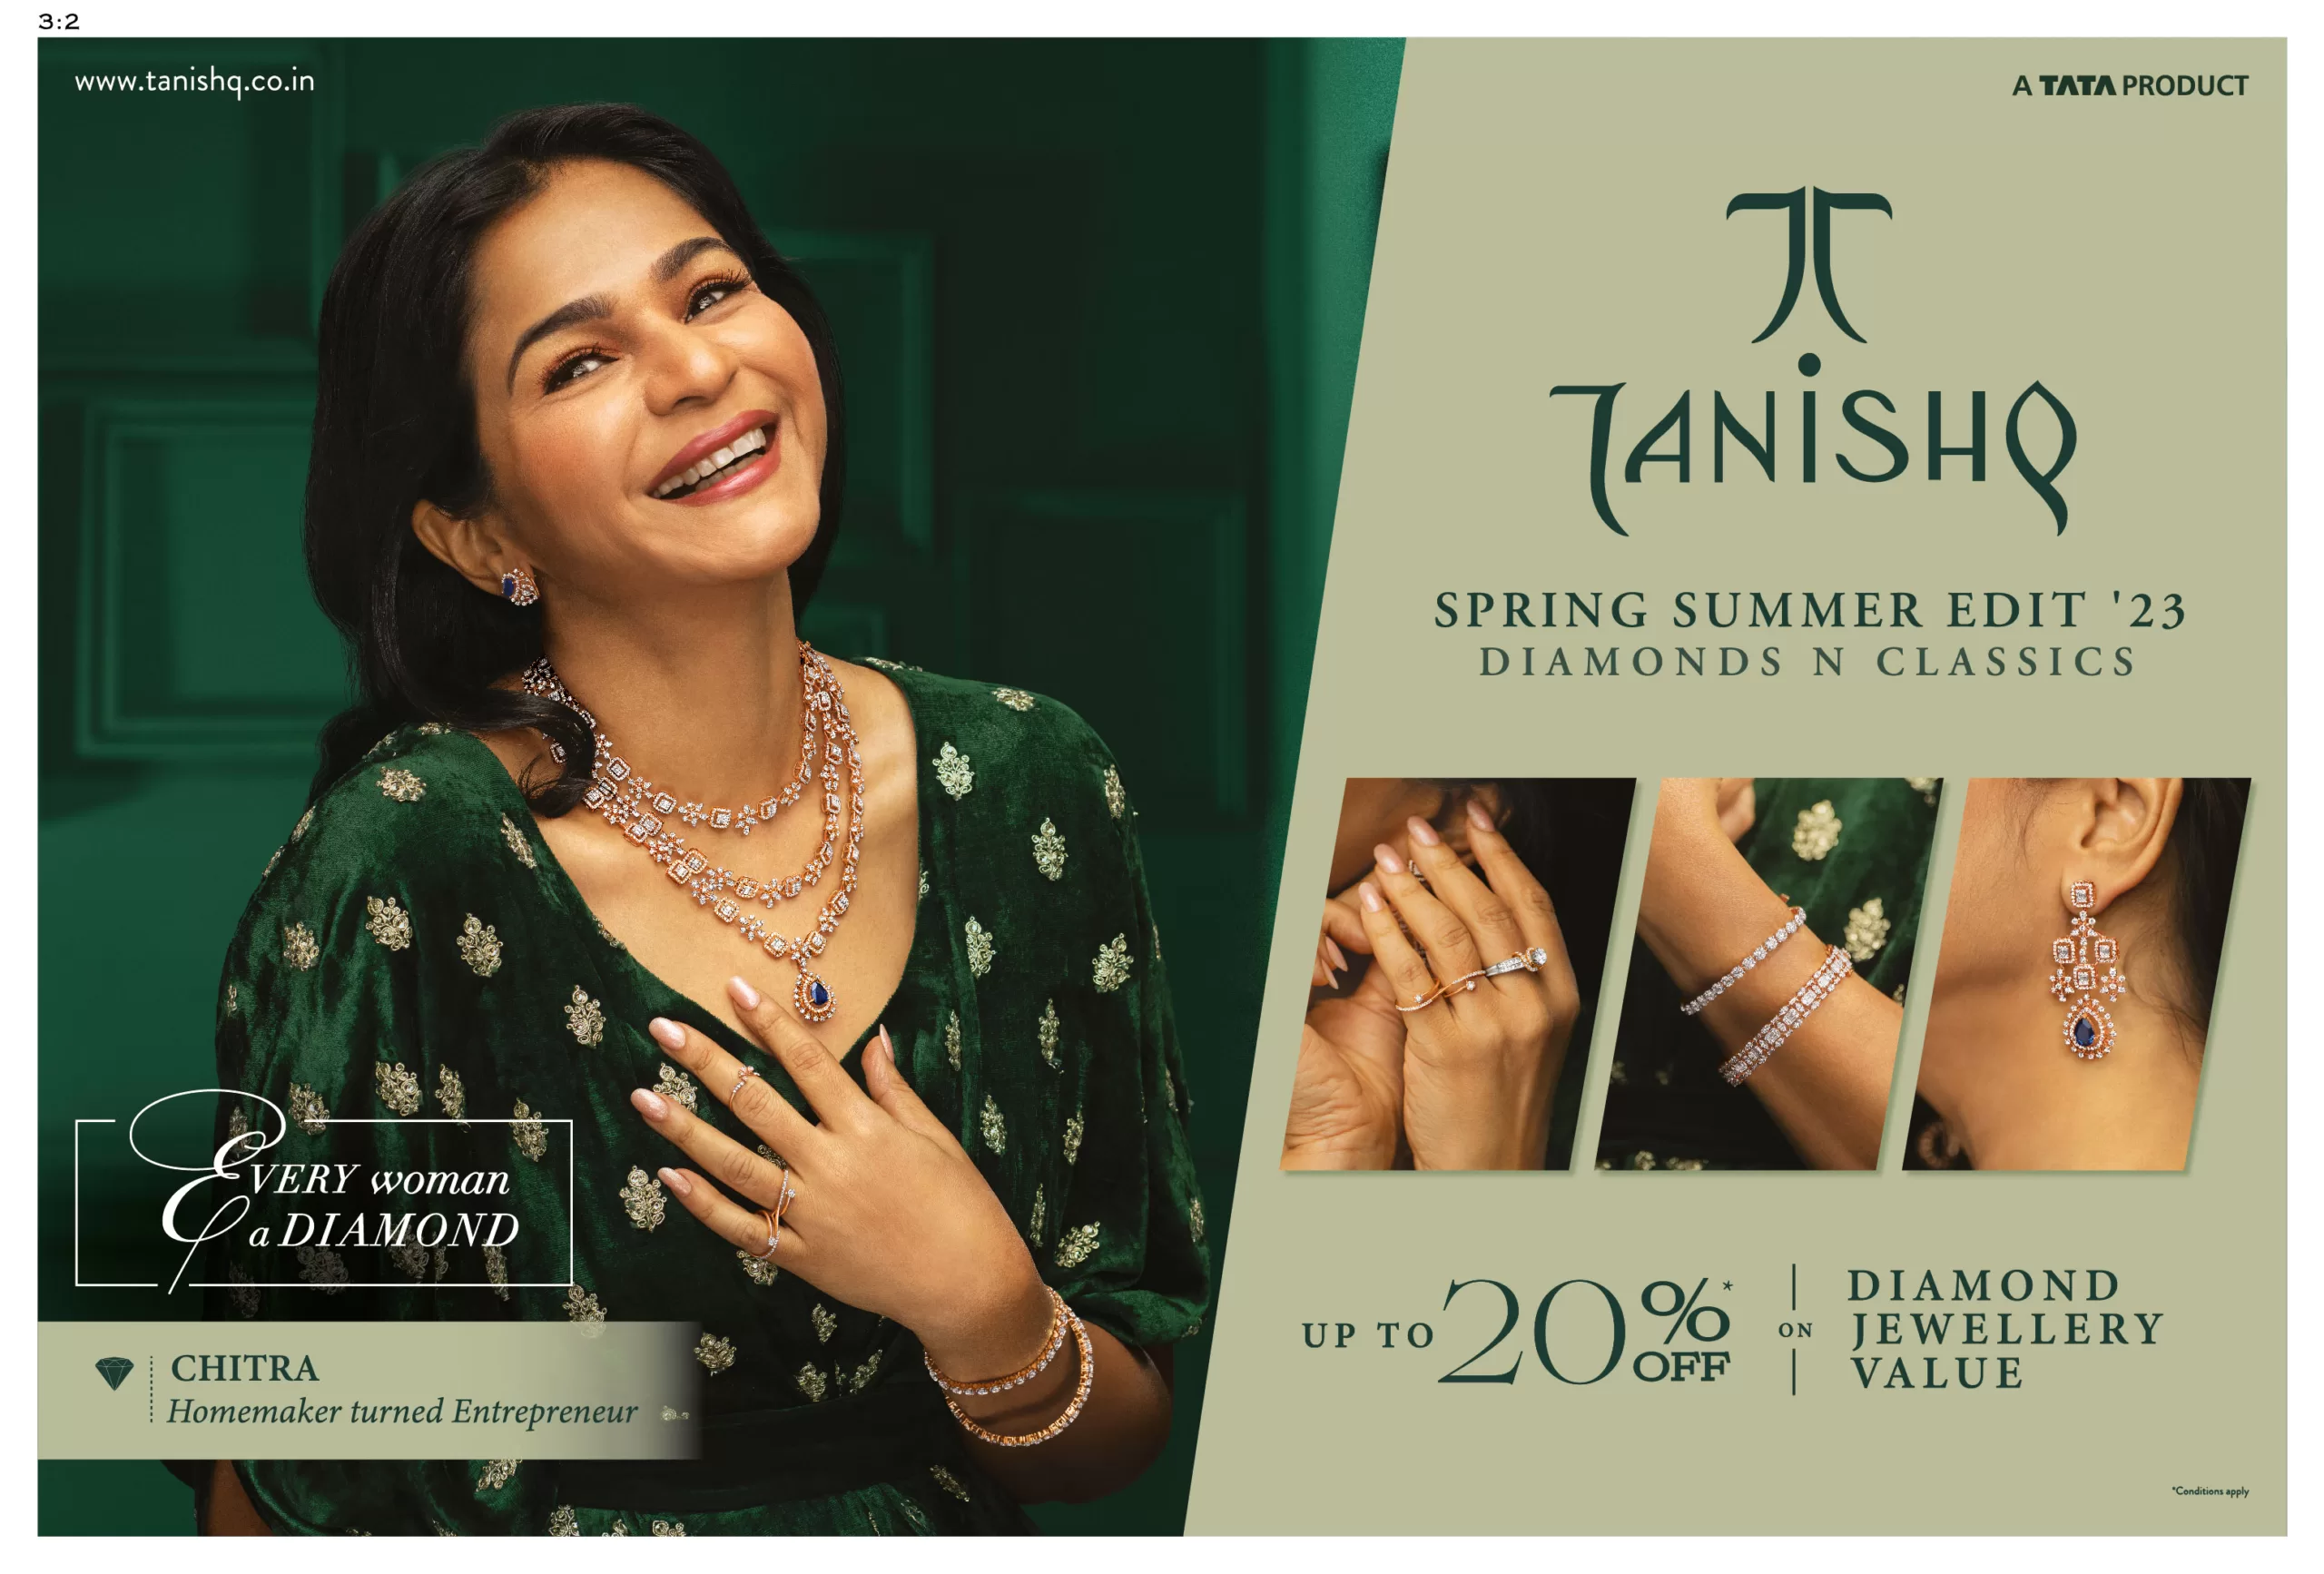 Tanishq launches The Spring Summer Edit 23